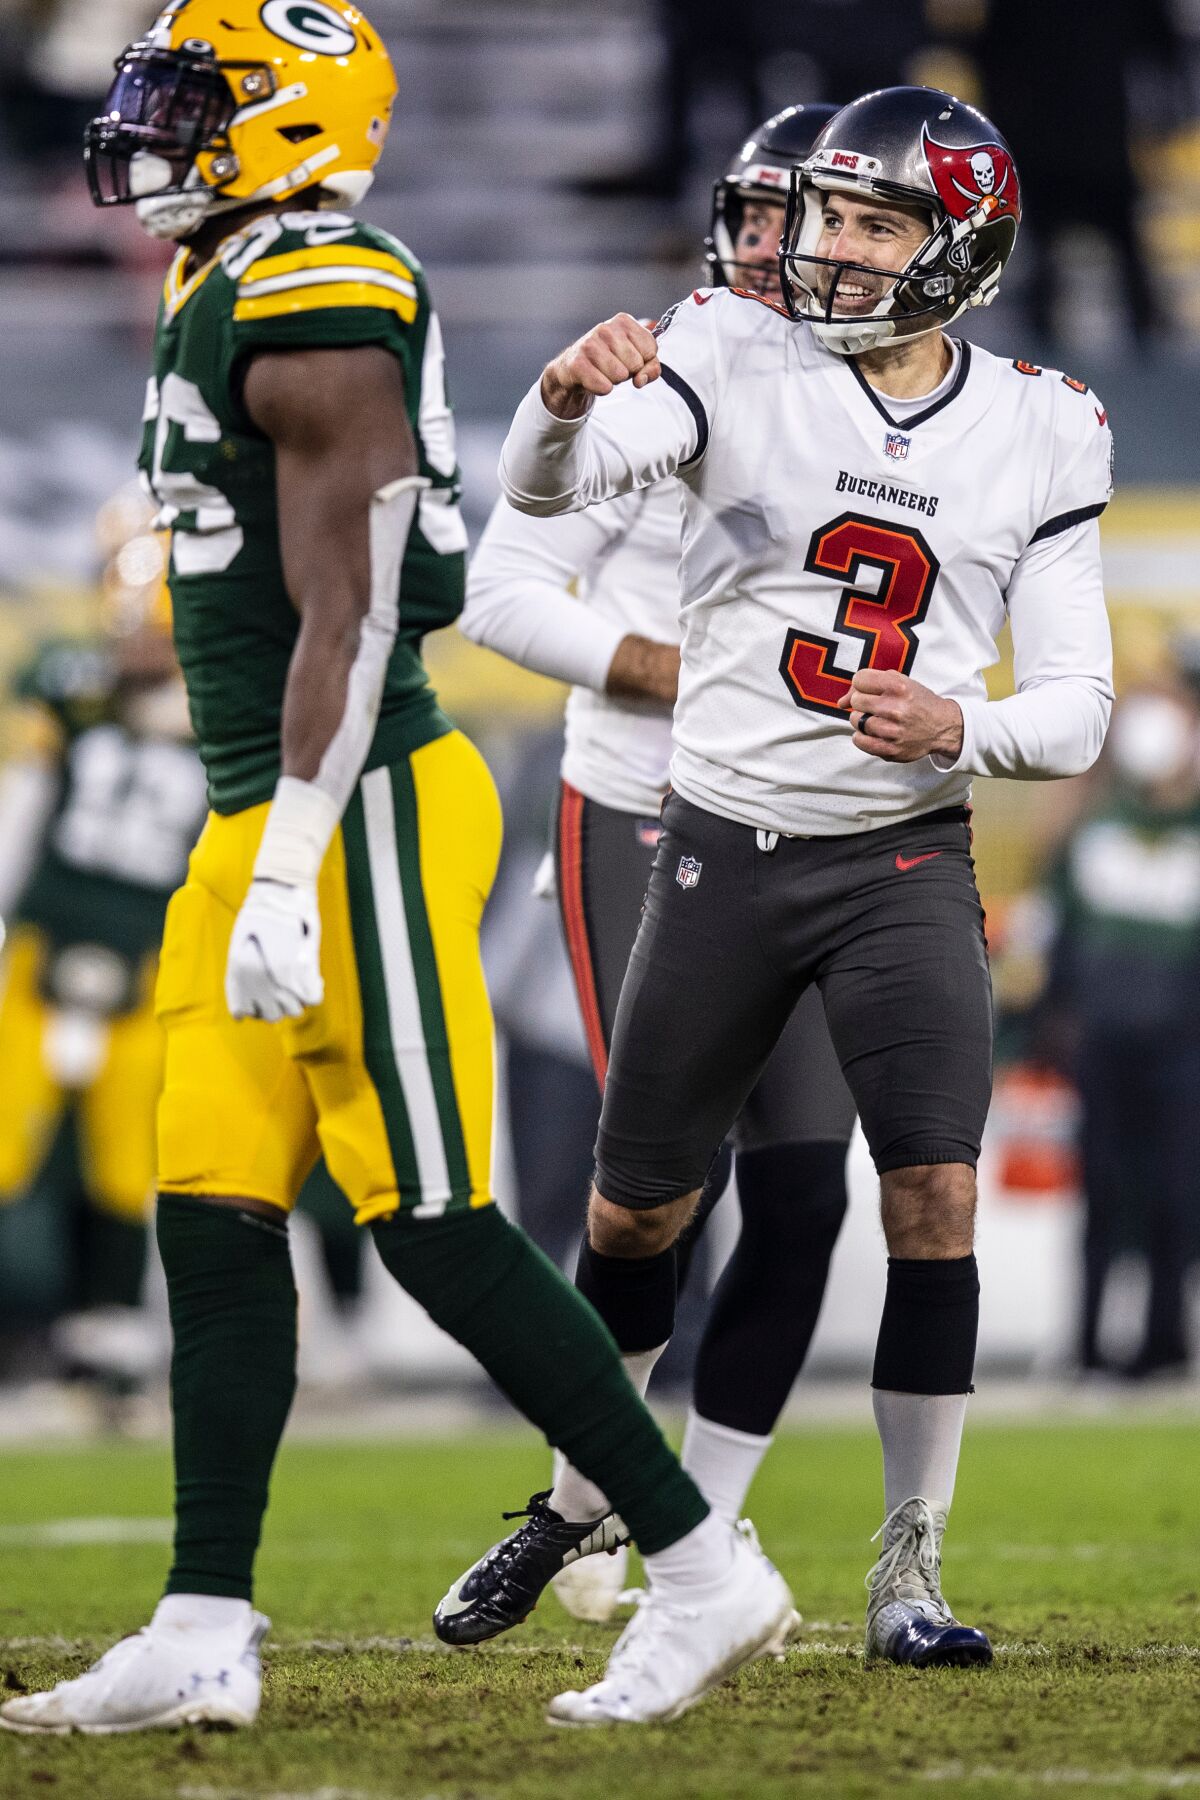 Tampa Bay kicker Ryan Succop, right, celebrates during the Buccaneers' 31-24 win over Green Bay on Jan. 24.